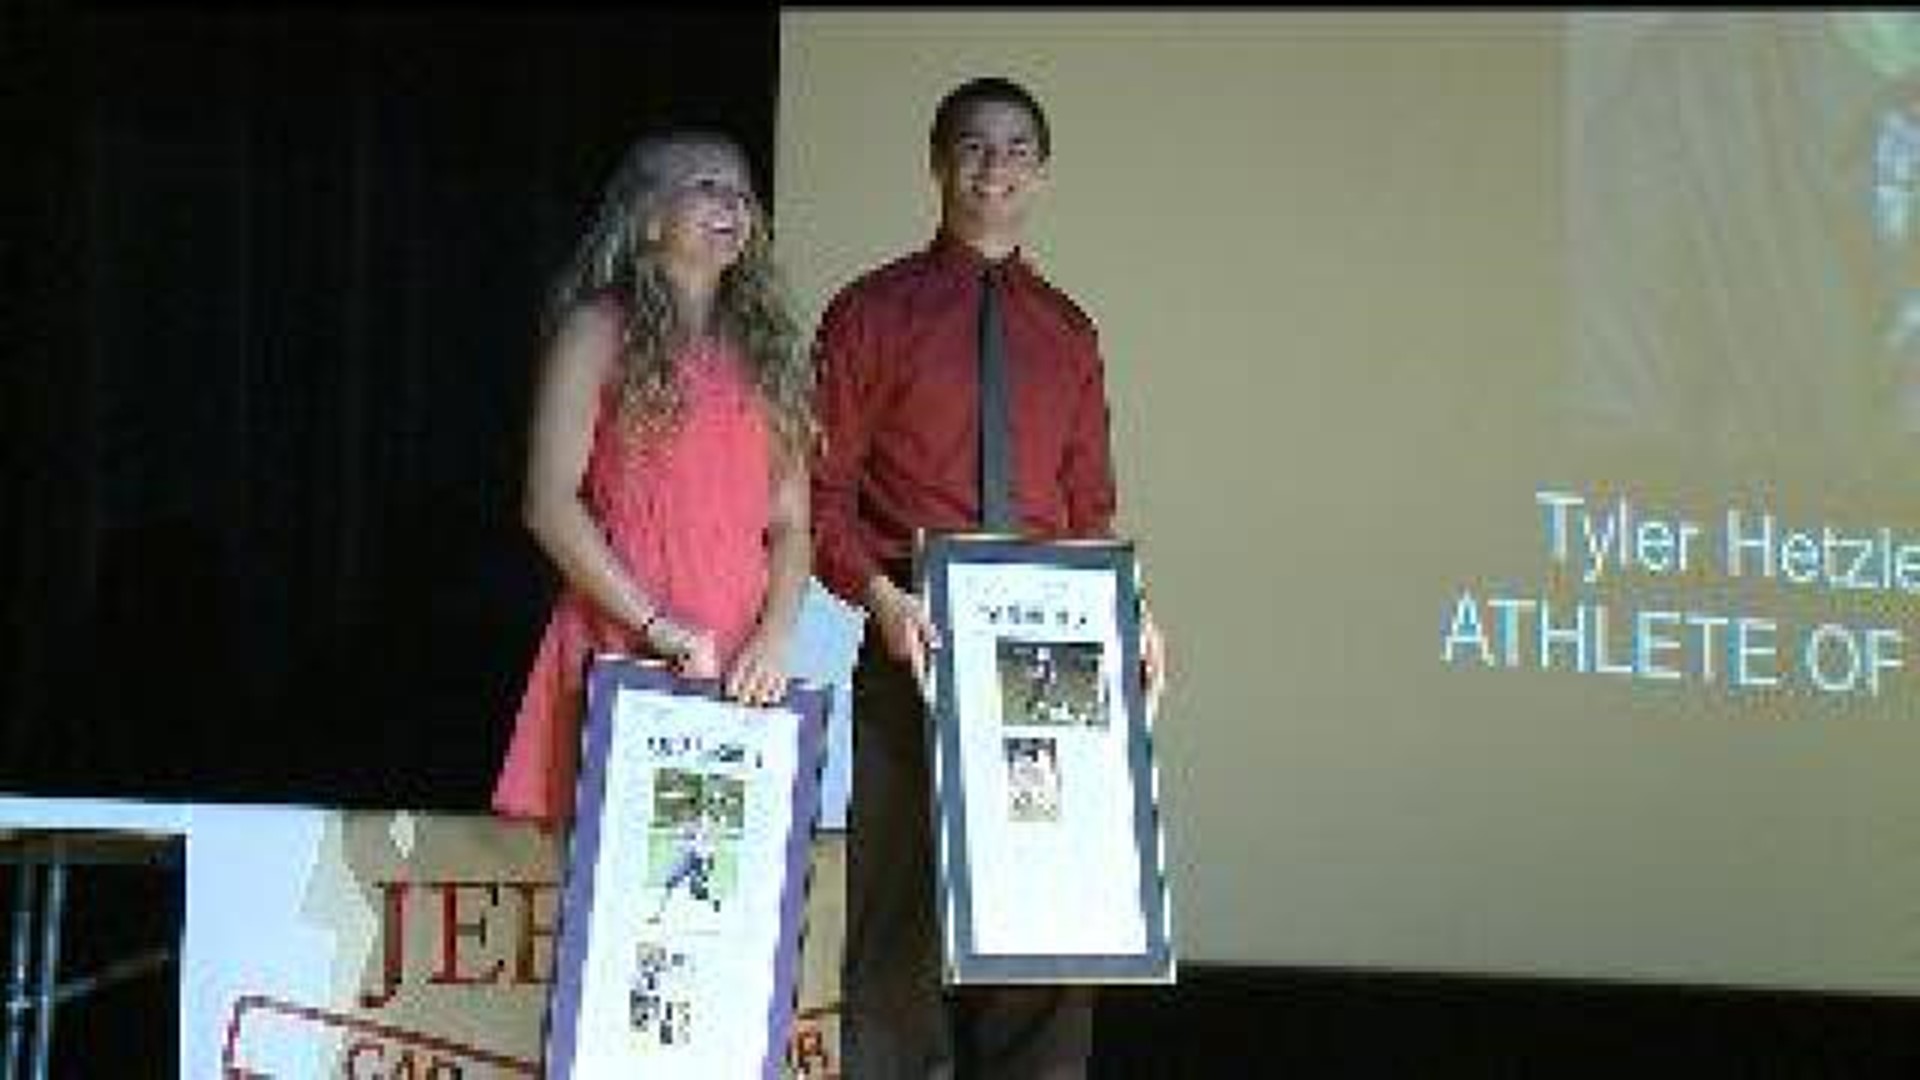 Shoultz and Hetzler shine at Salute to Sports